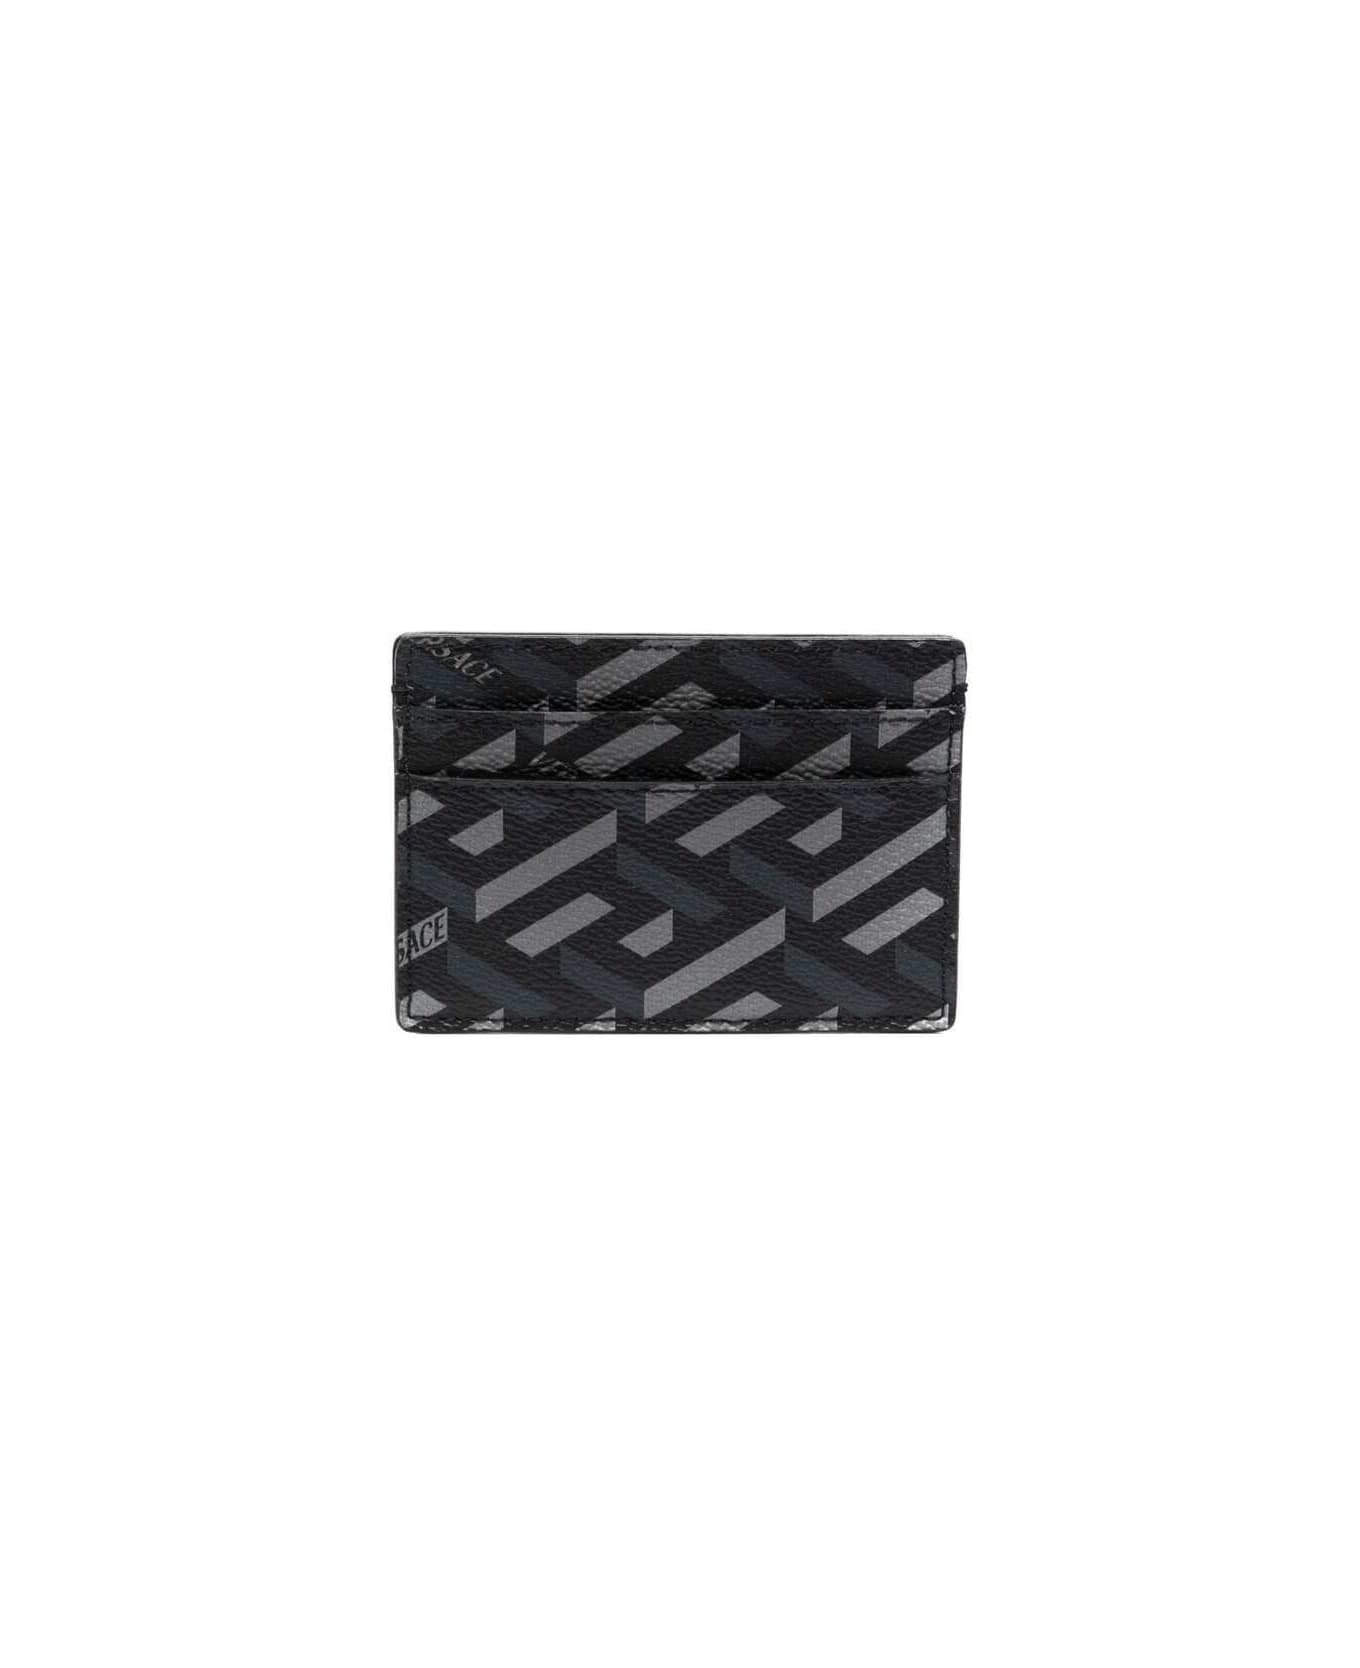 Versace Gray And Black Cardholder In Leather With  Allover Greek Signatur Pattern Print Versace Man - Grey